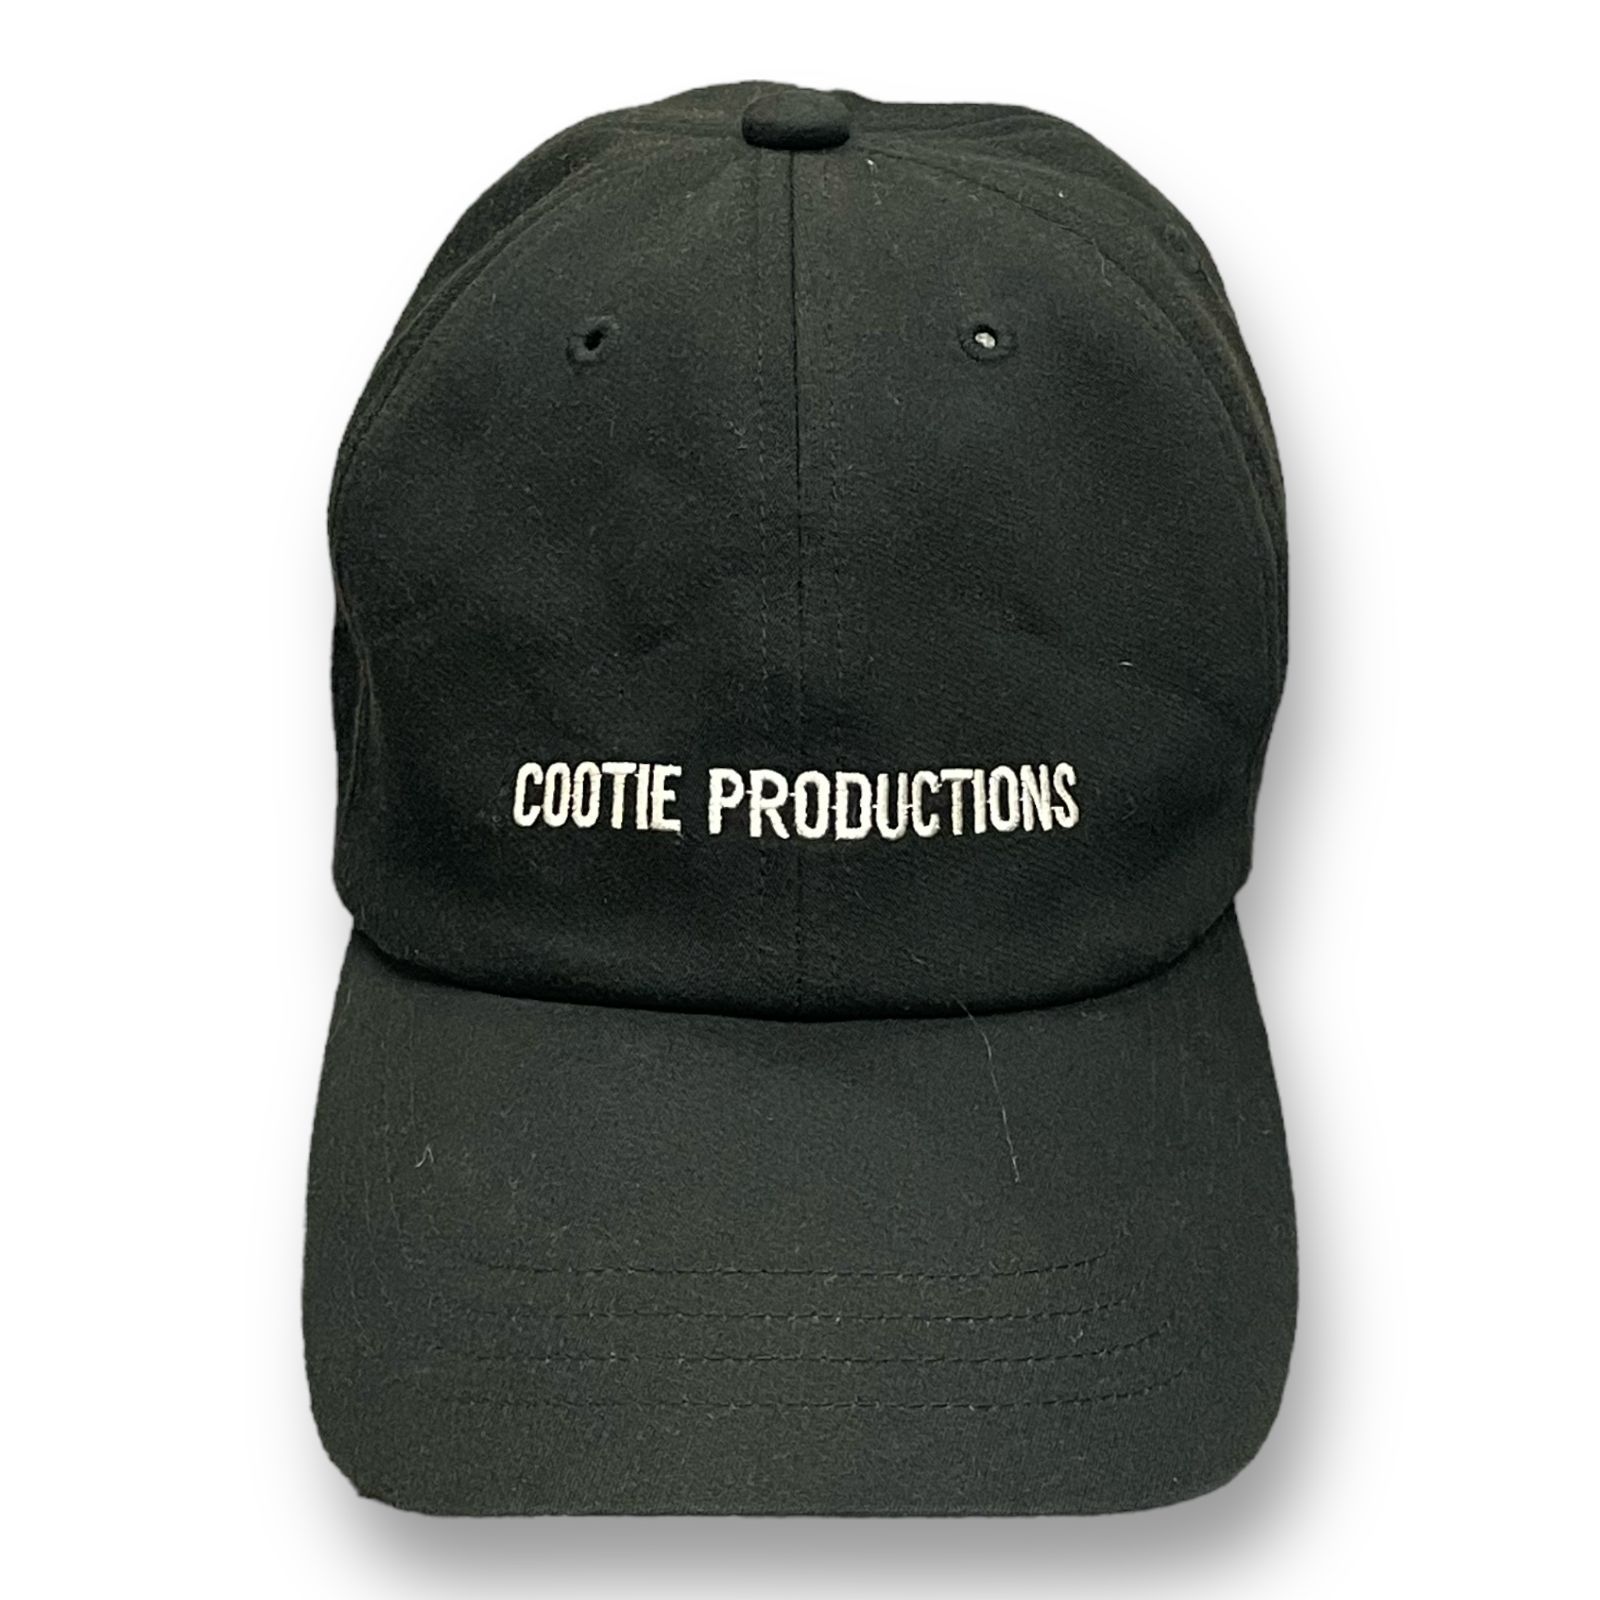 COOTIE PRODUCTIONS 6 Panel Cap 刺繍 ロゴ キャップ クーティー